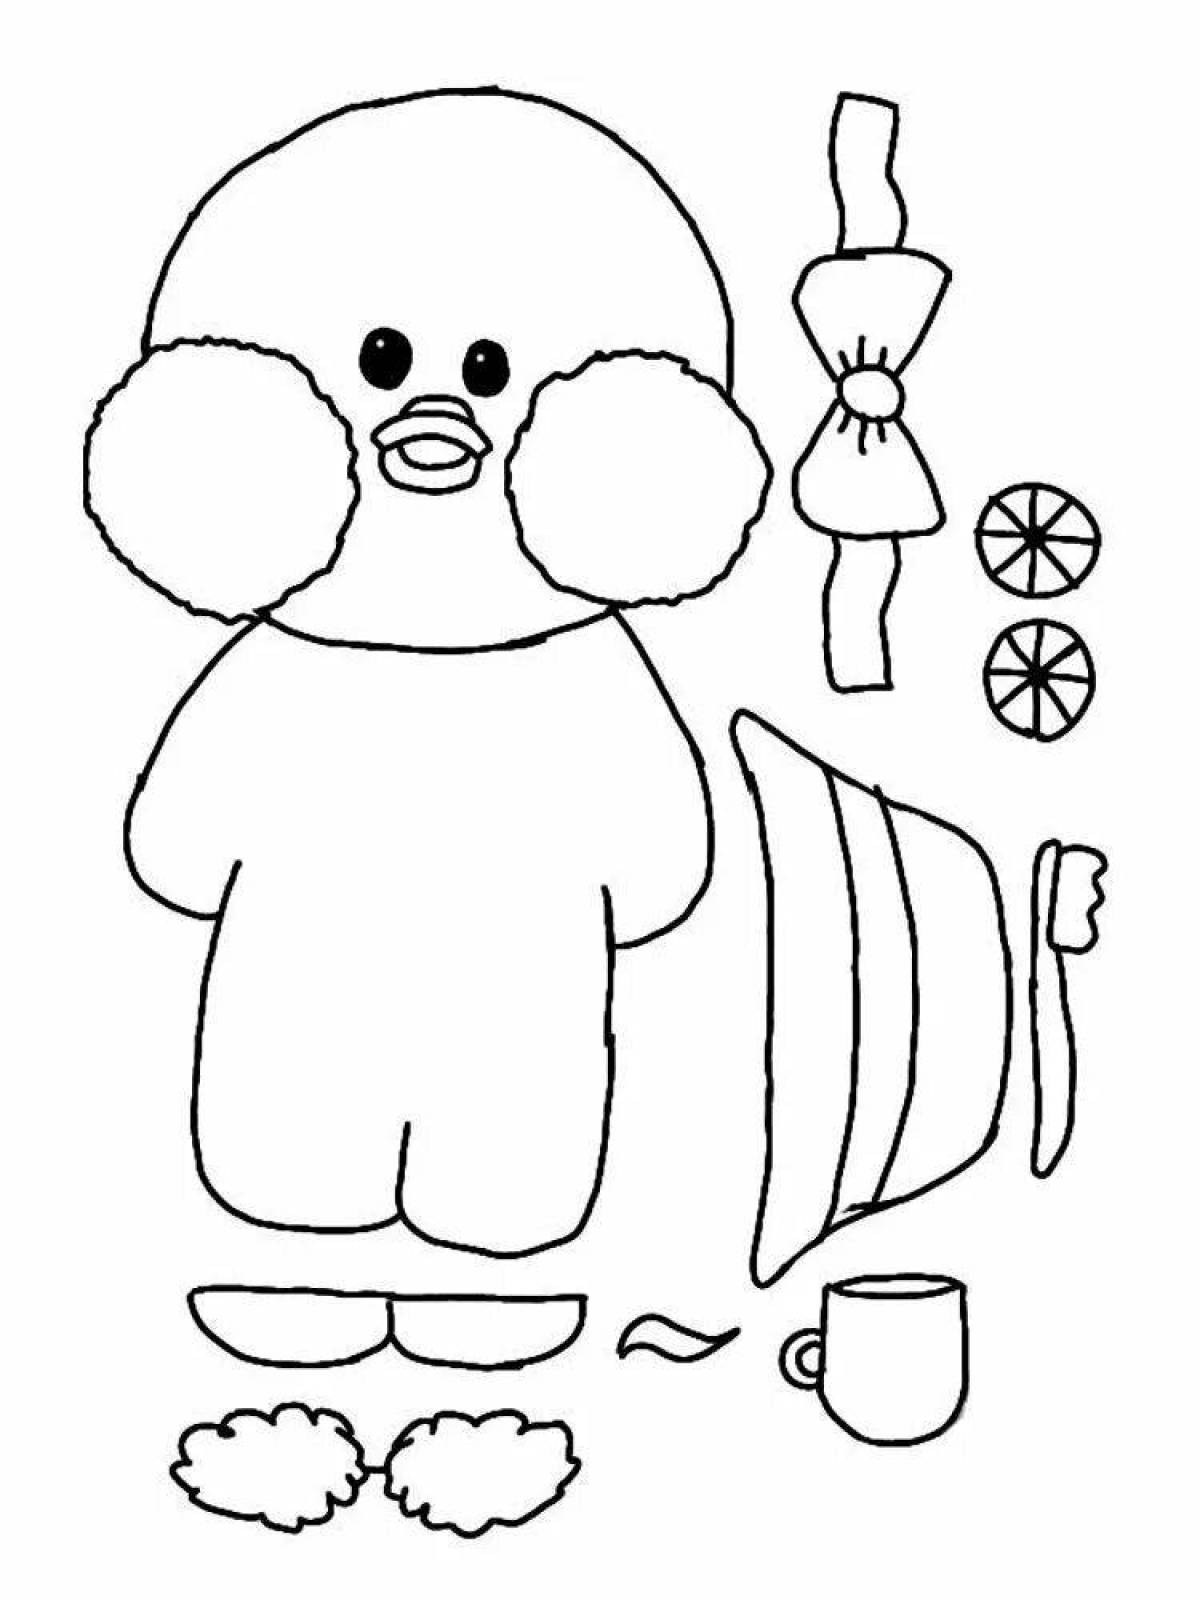 Creative lalafanfan duck coloring page